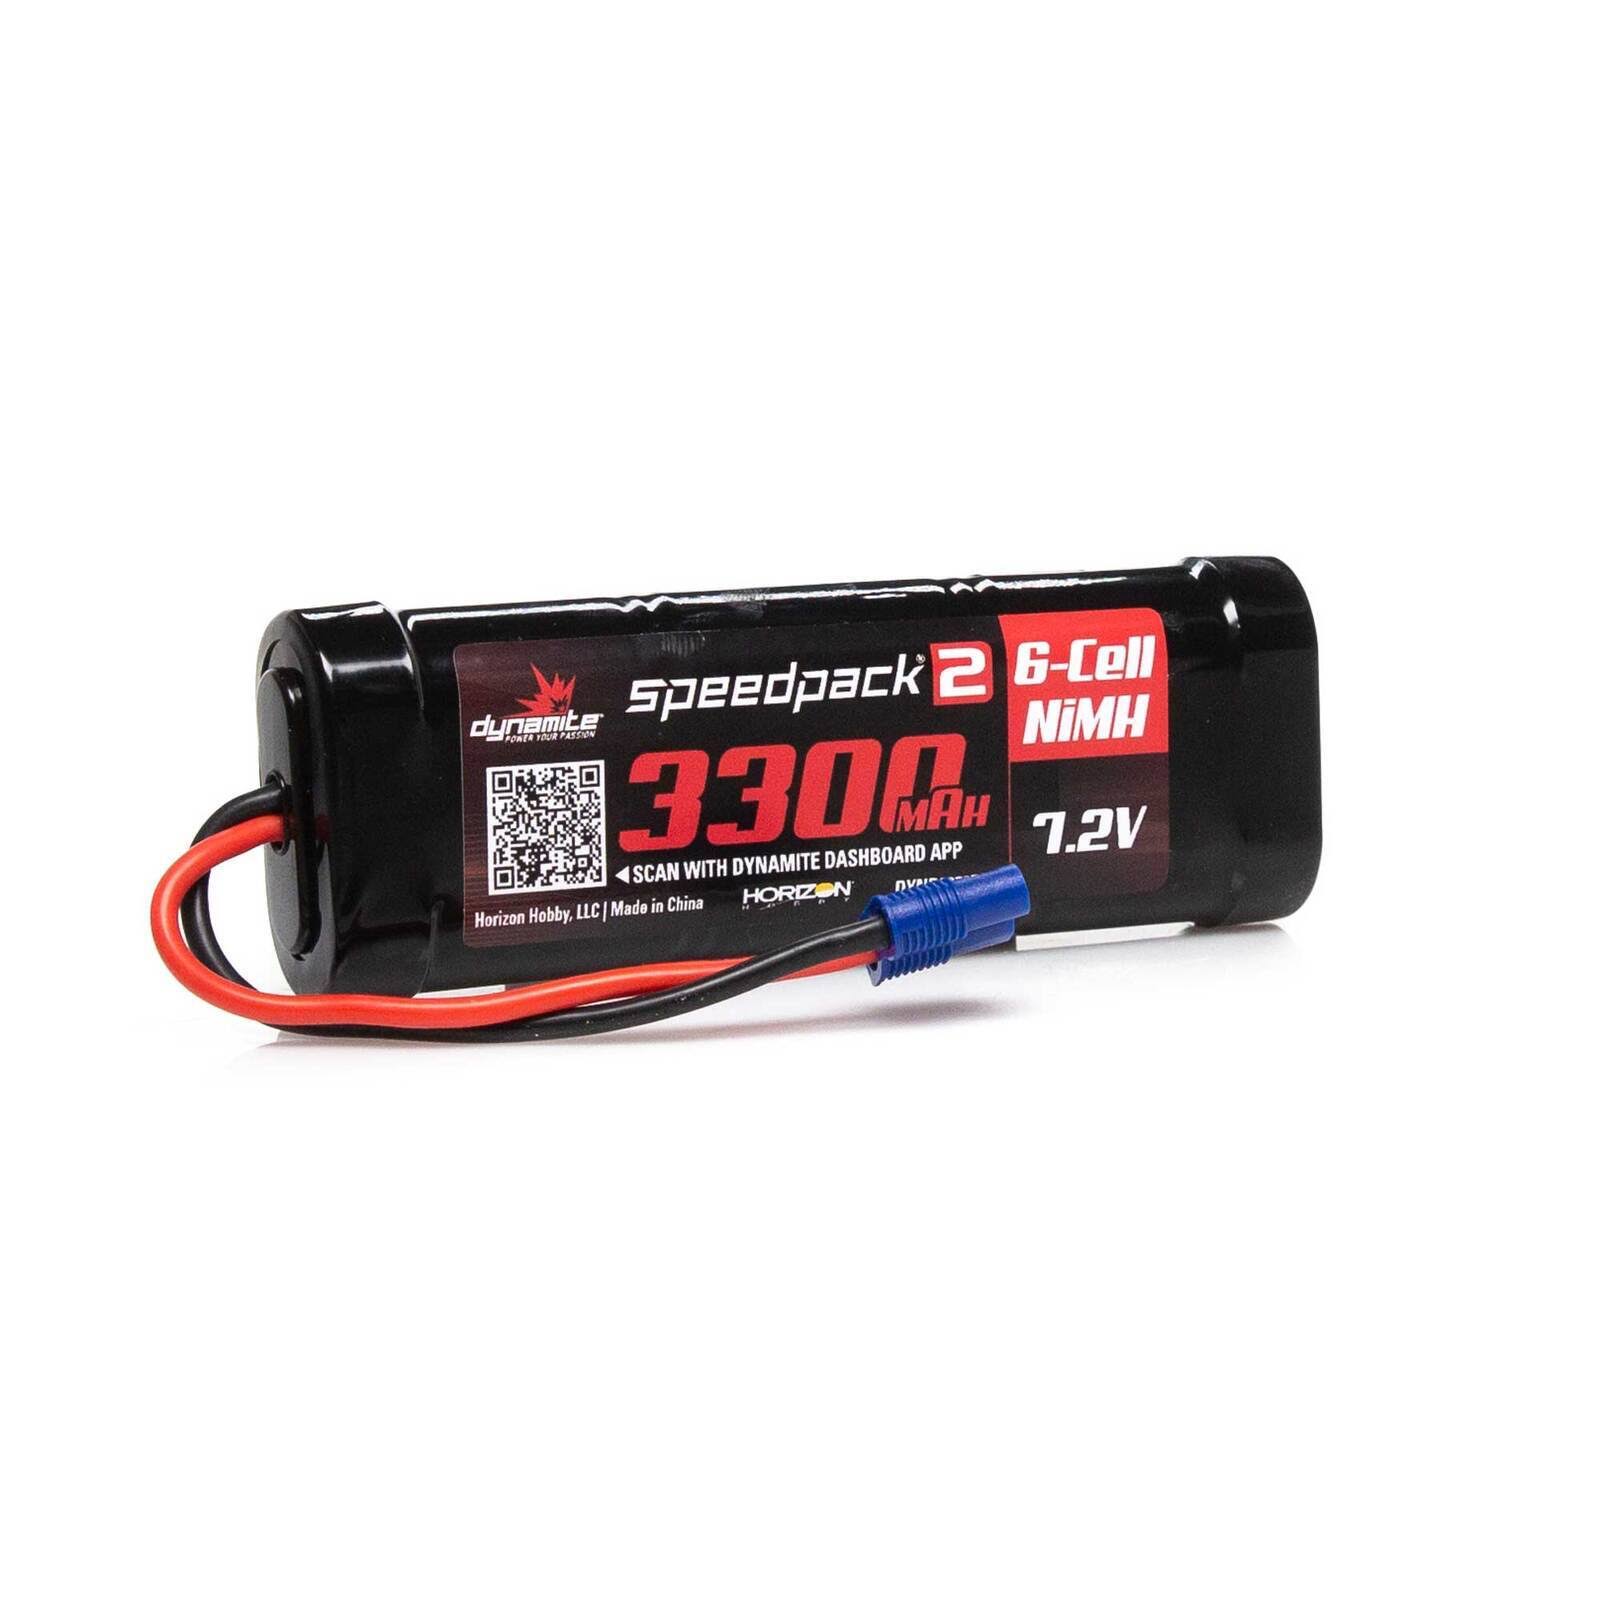 Dynamite 3300mAh 7.2V NiMH Speed Pack Battery with EC3 Connector